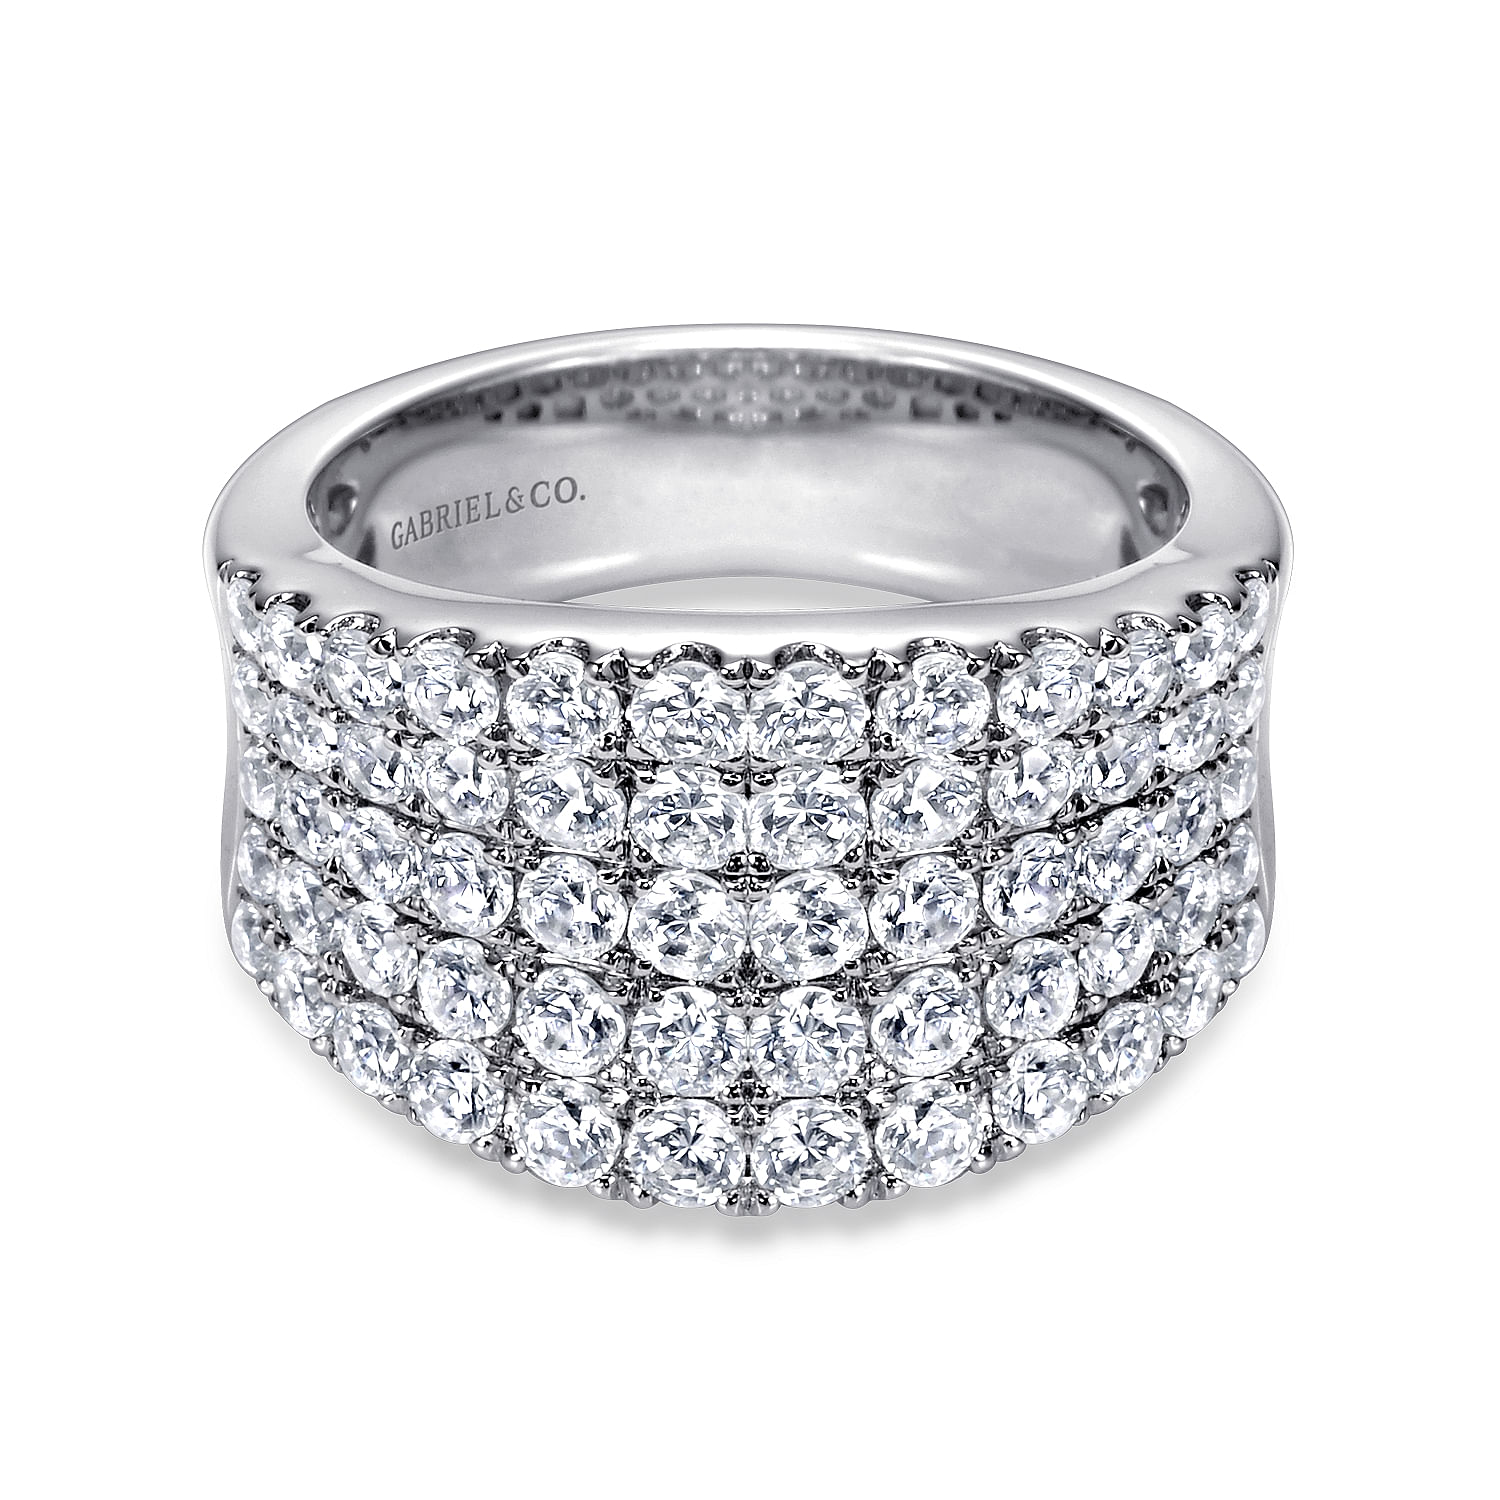 14K White Gold Wide Band Pave Diamond Ring